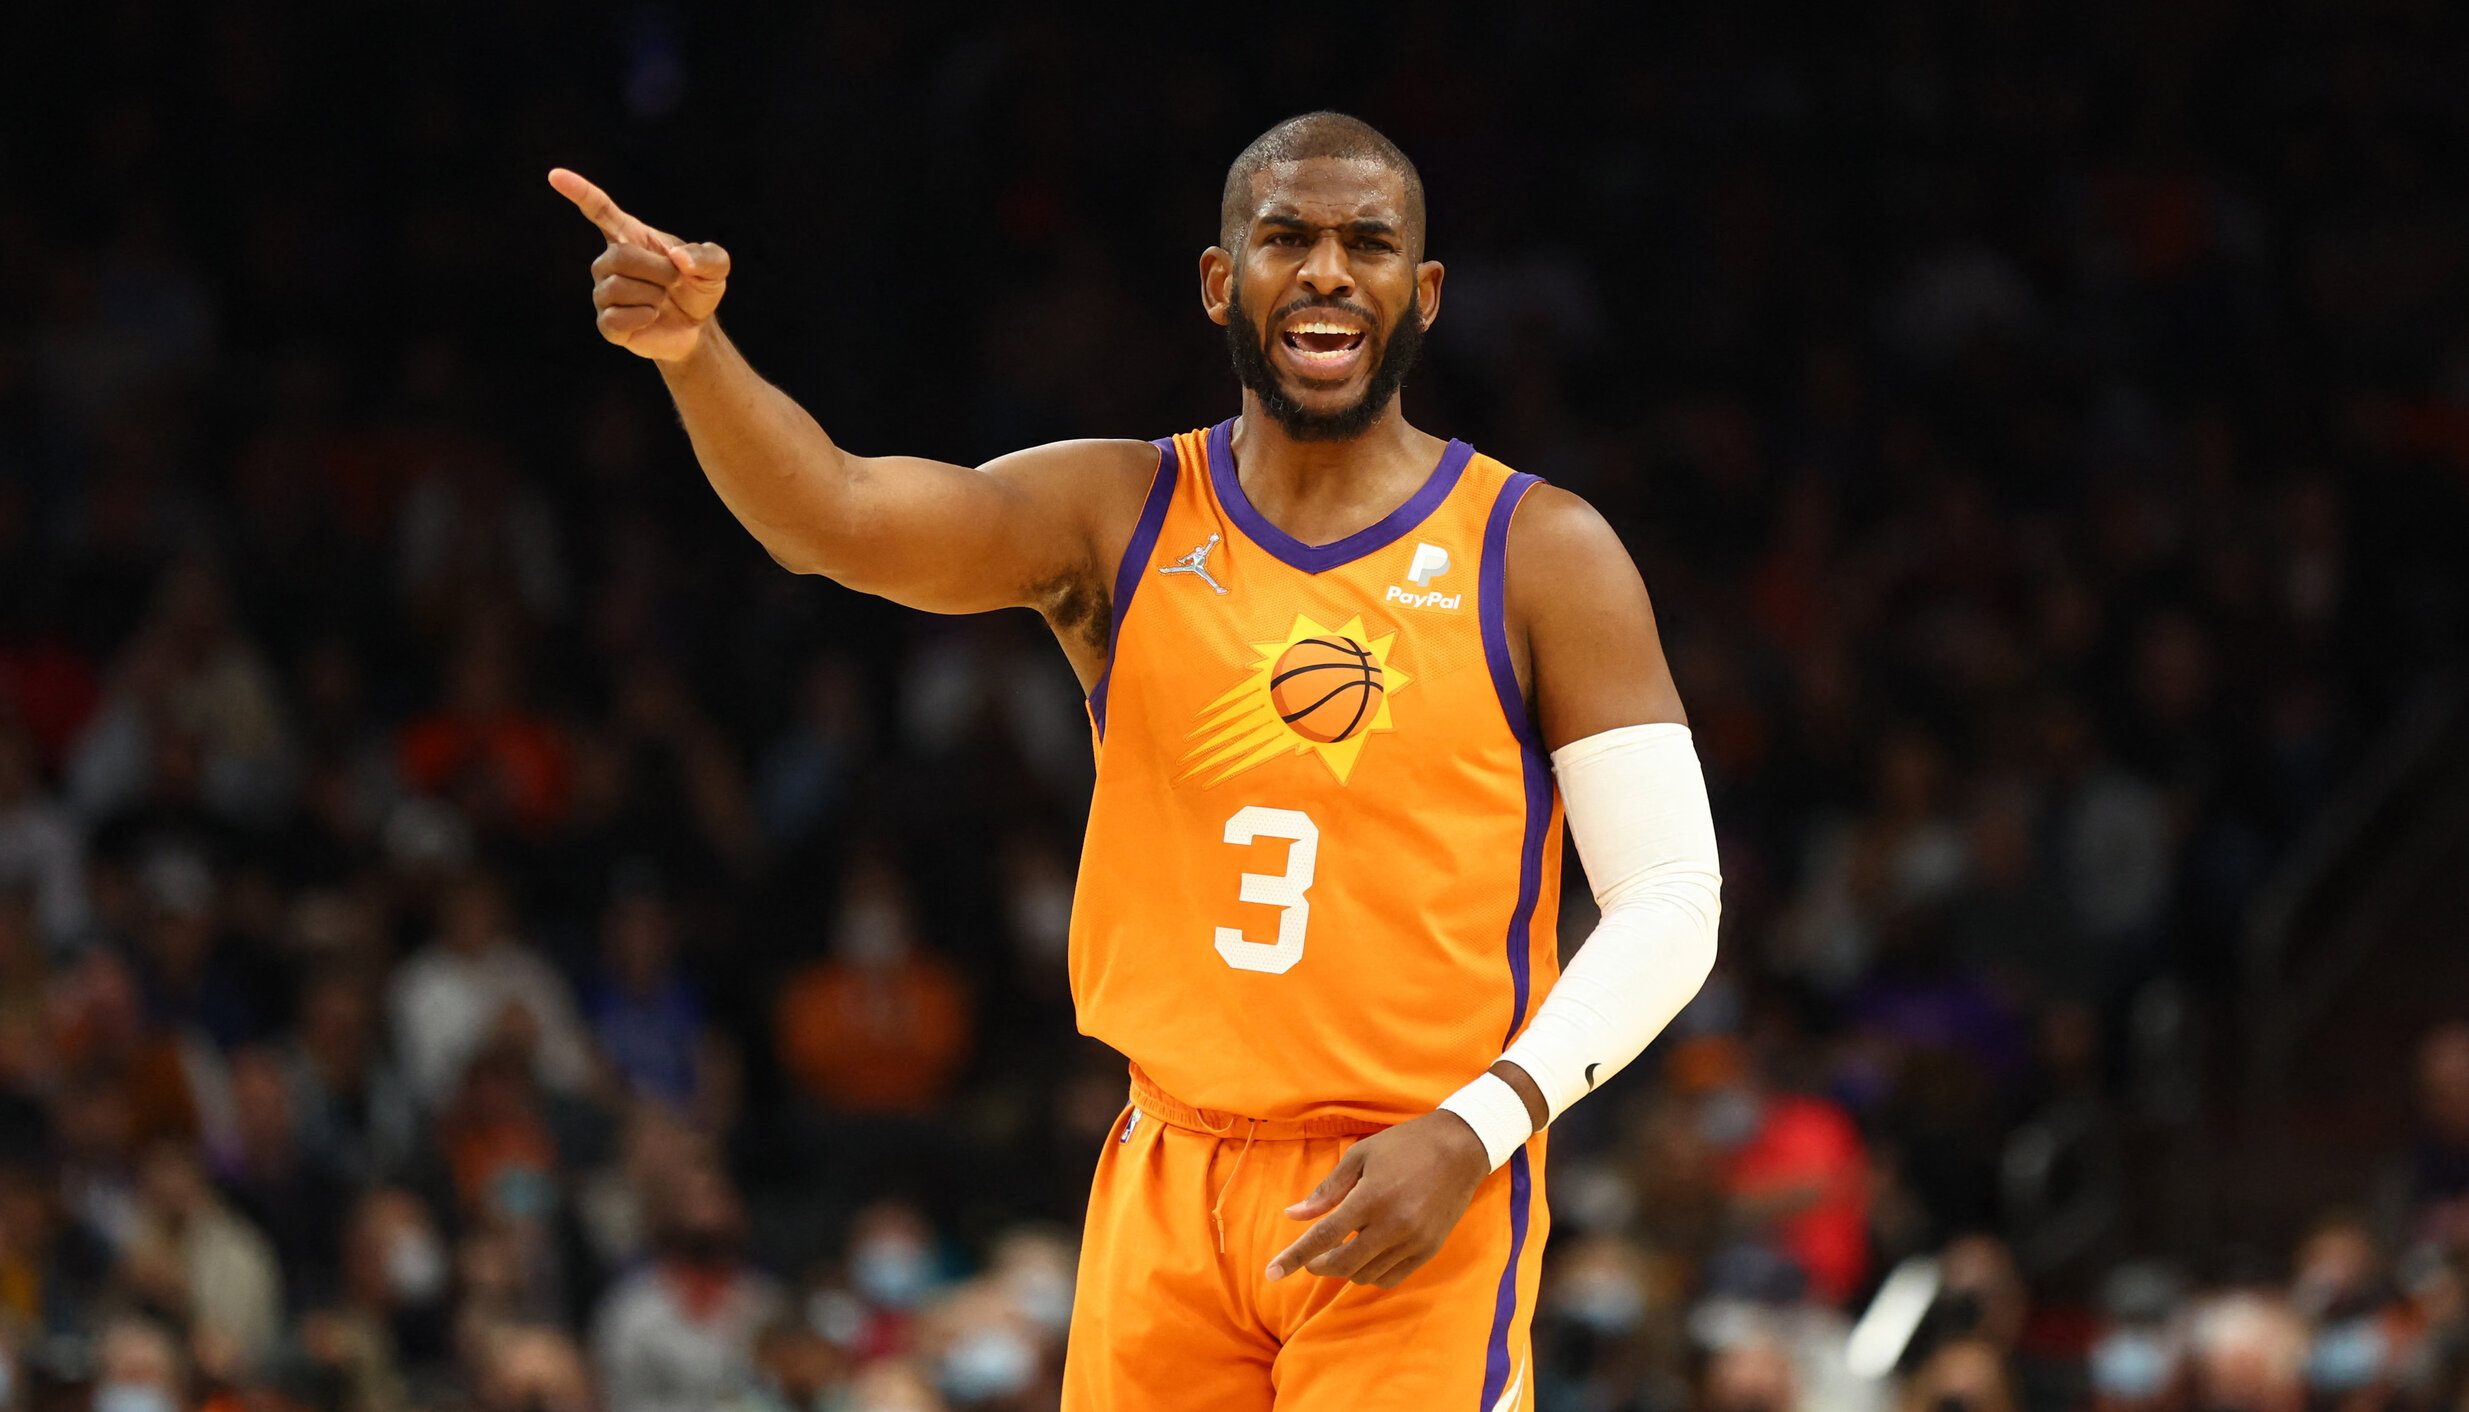 Chris Paul’s triple-double lifts streaking Suns over Wolves